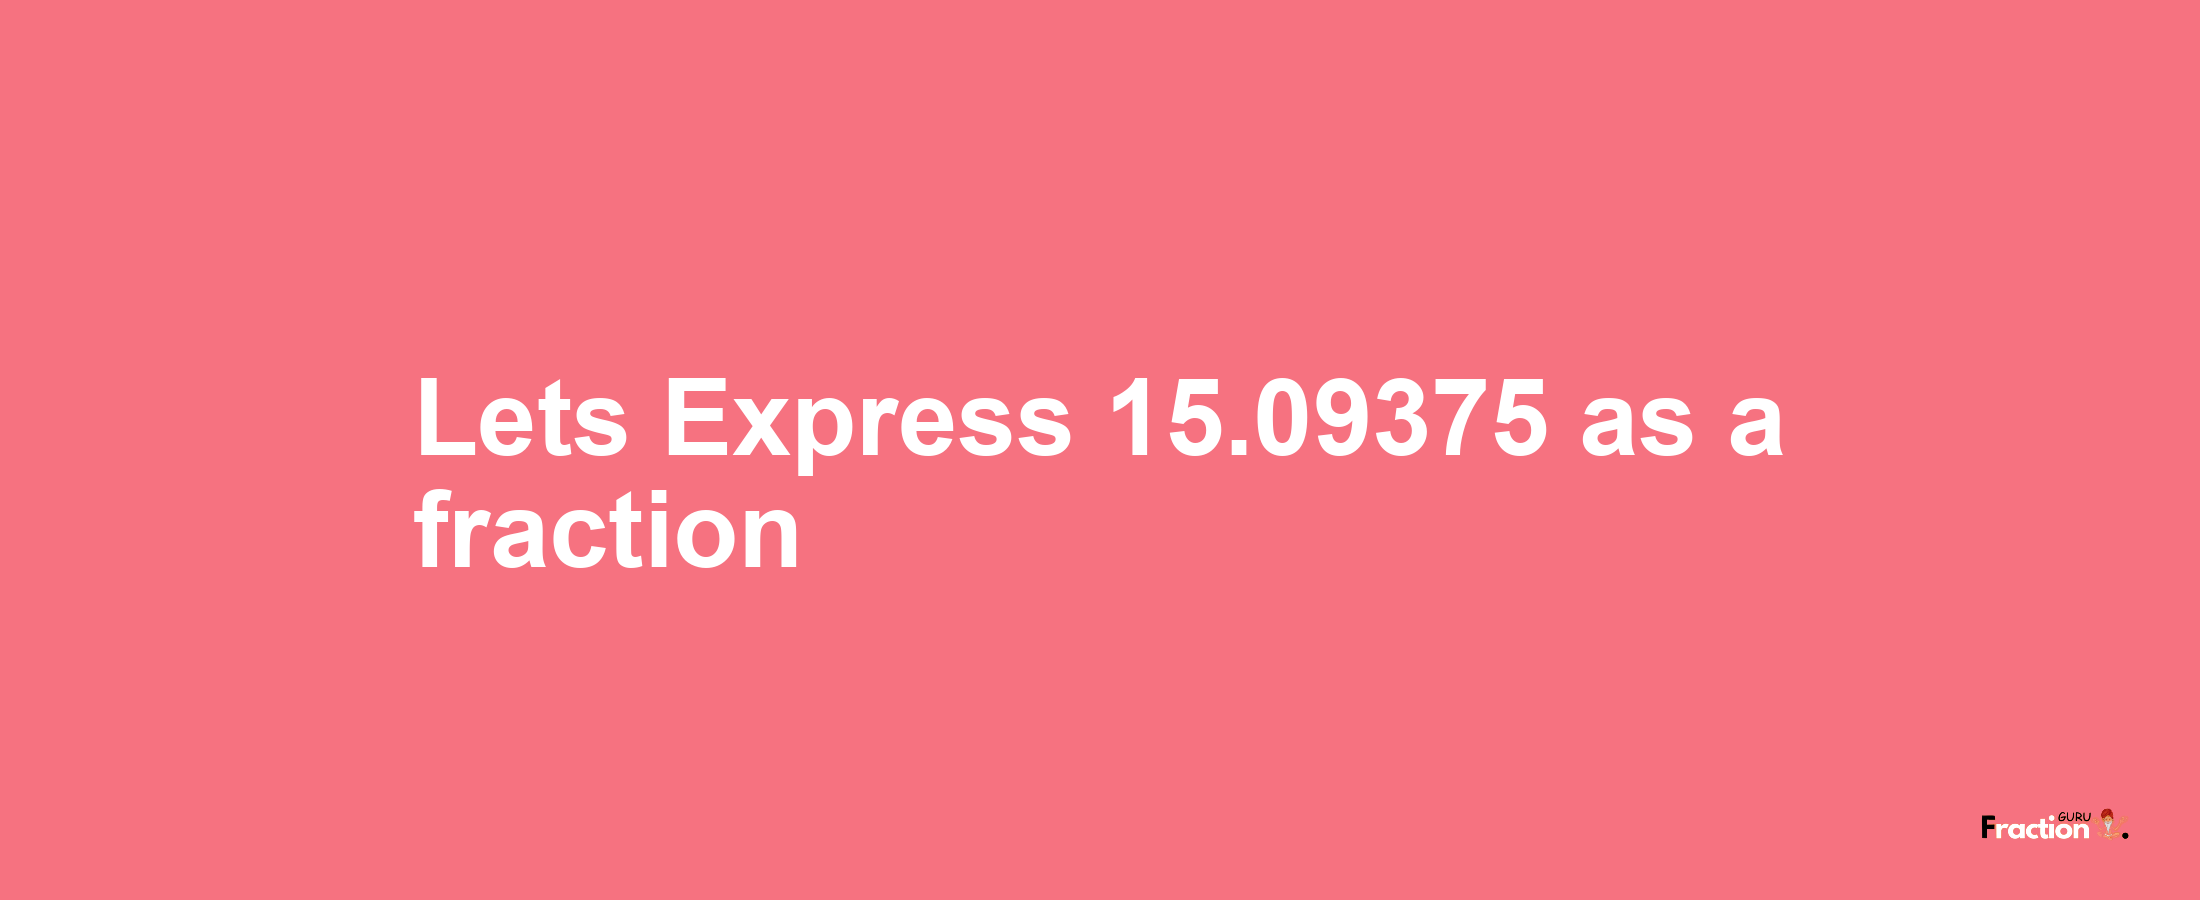 Lets Express 15.09375 as afraction